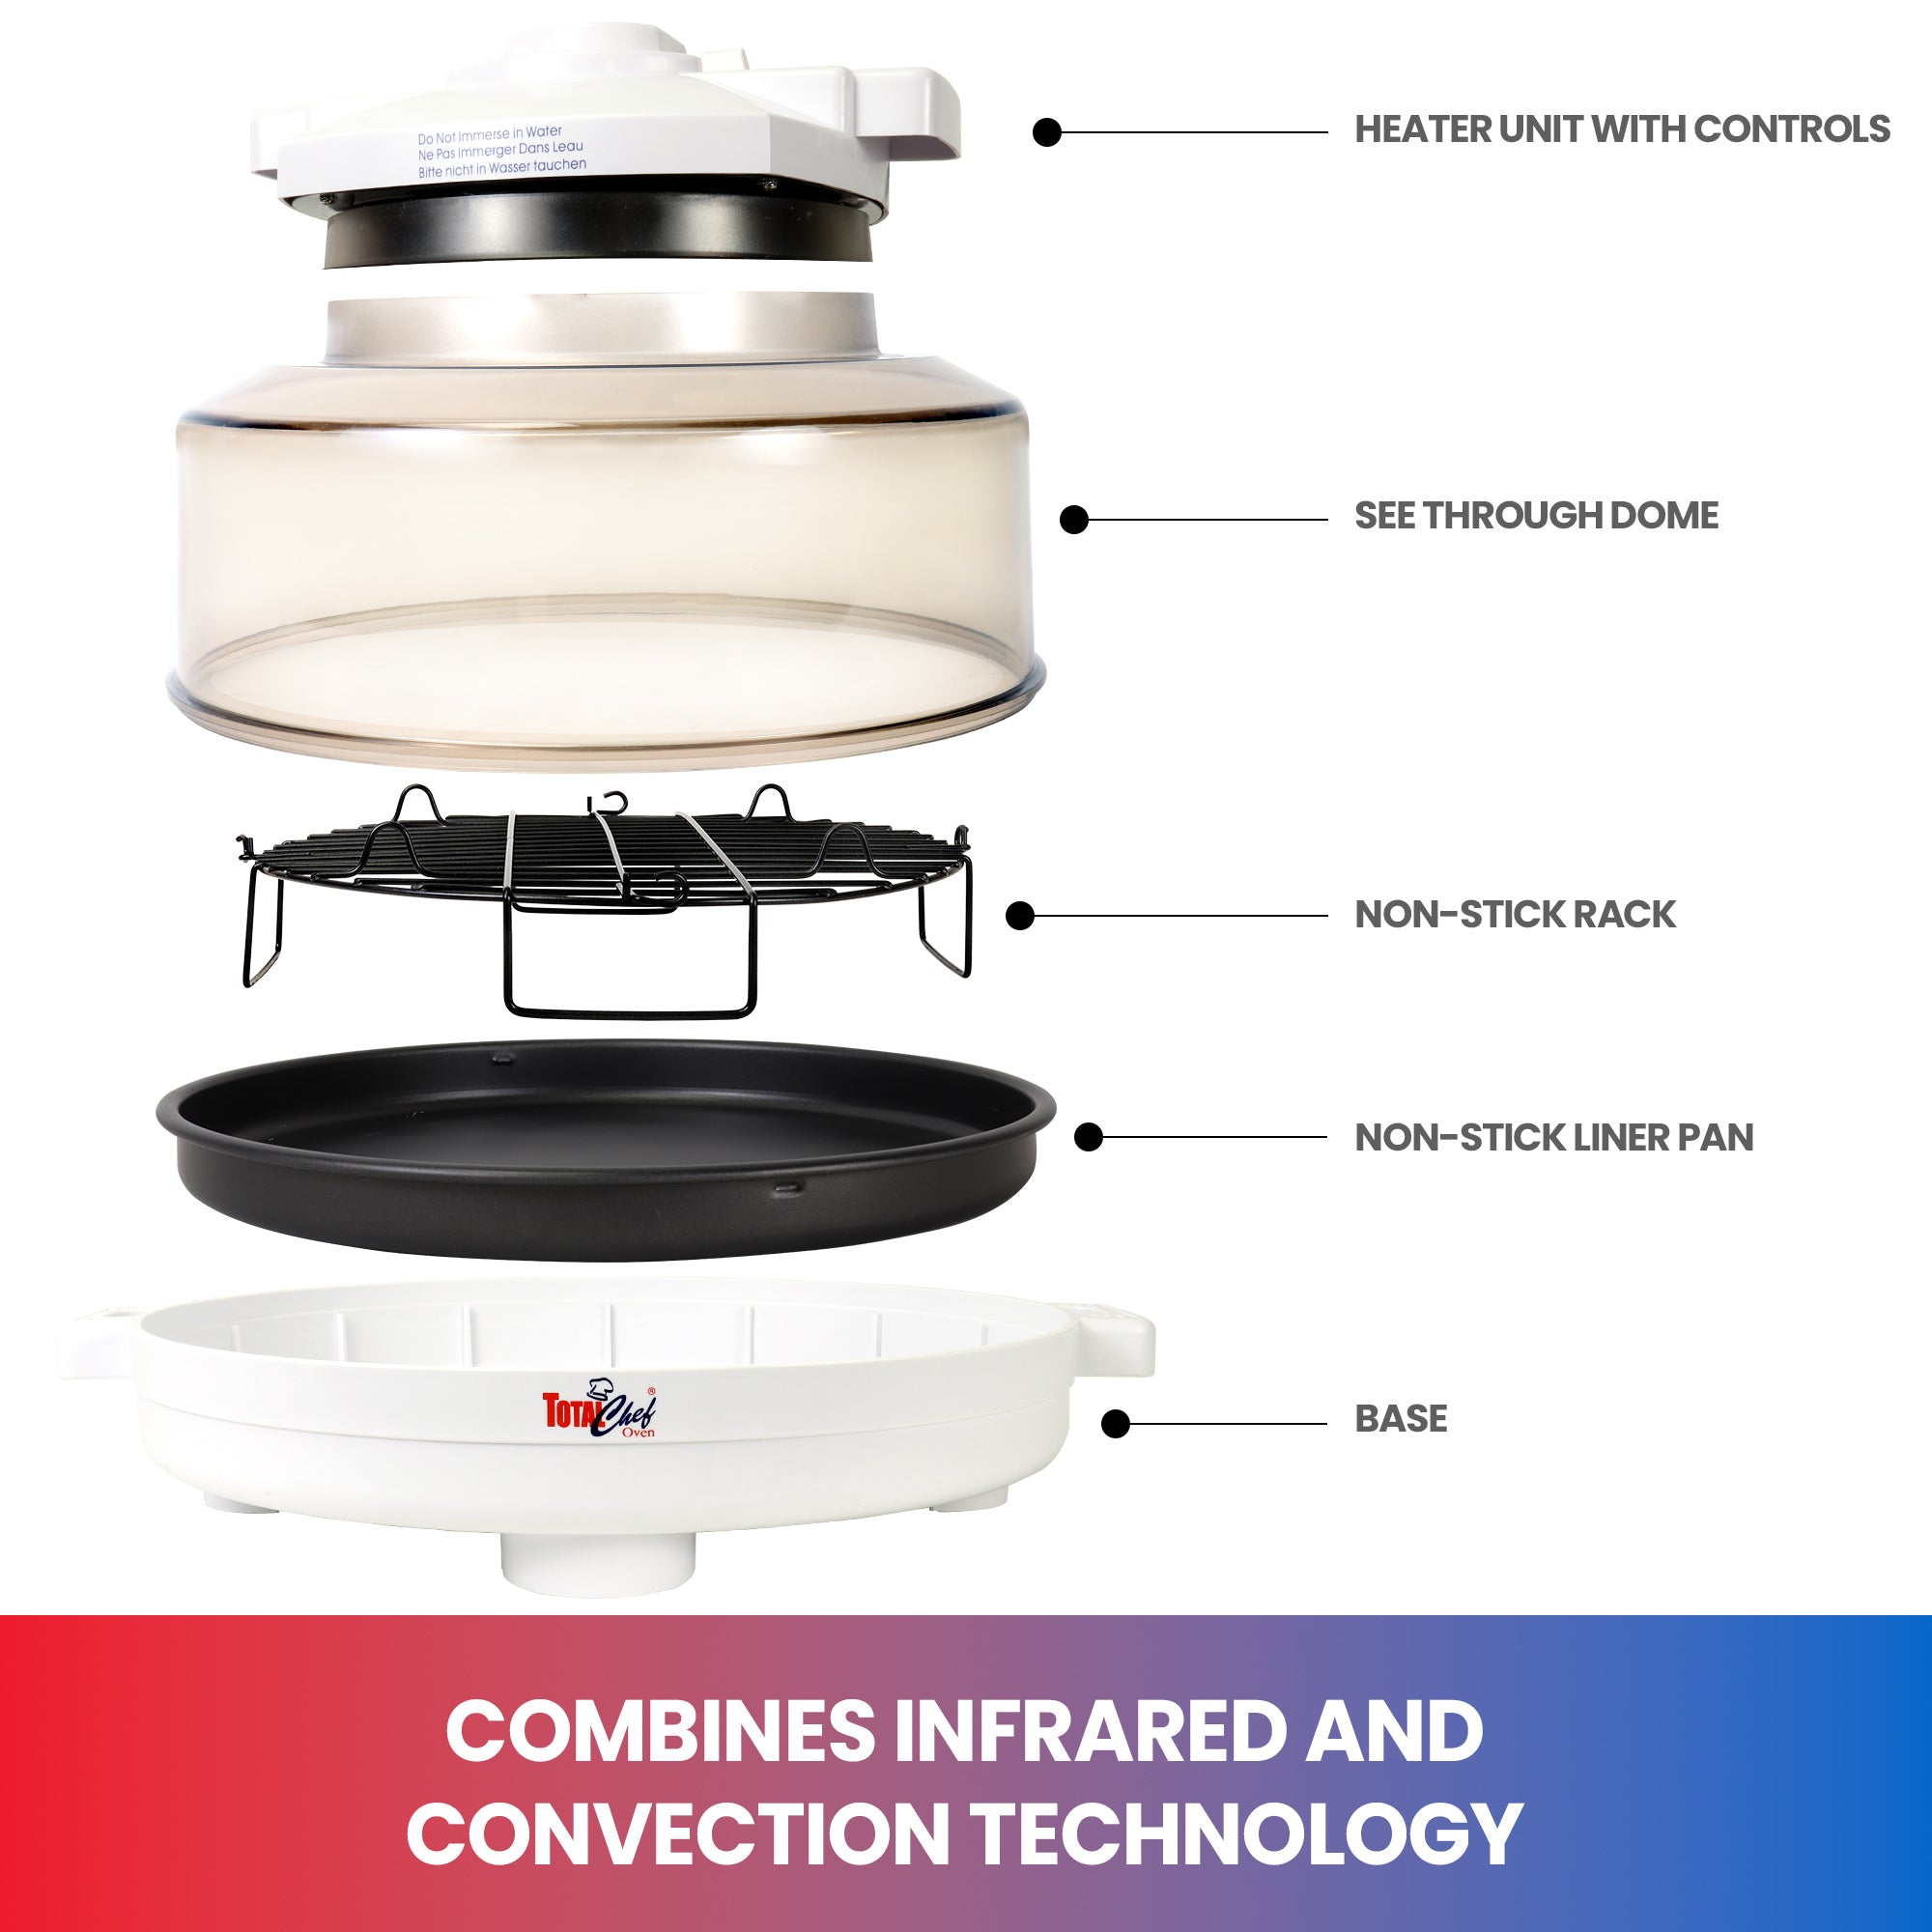 Product shot on a white background shows the parts of the Total Chef infrared oven, labeled: Heater unit with controls; see-through dome; non-stick rack; non-stick liner pan; base. Text below reads, "Combines infrared and convection technology"